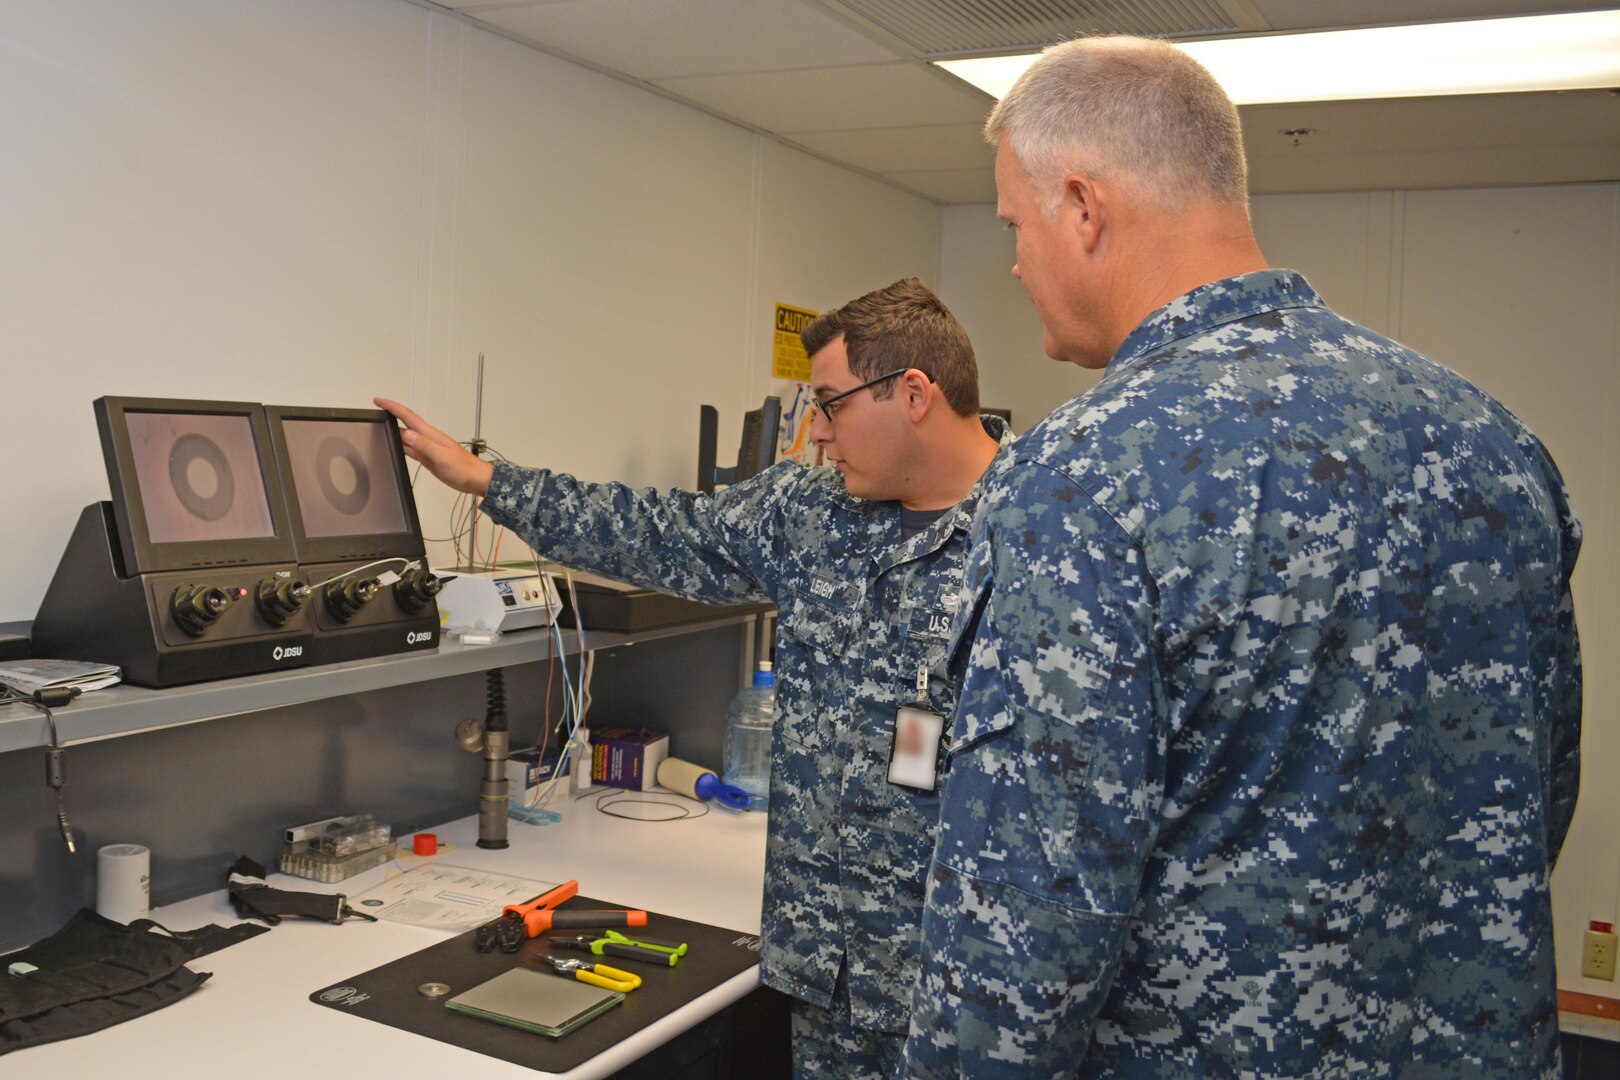 Petty Officer 1st Class Andrew Leigh (left) demonstrates to Rear Adm. Jon Kreitz how Sailors at Southeast Regional Maintenance Center (SERMC) test, clean and repair fiber optic cable. The 2M (Miniature/Micro-miniature) shop at SERMC can inspect, repair, fabricate and troubleshoot fiber optic cable onboard all applicable classes of U.S. Navy surface ships. This image was manipulated using filters to blur portions for security and/or privacy concerns. 